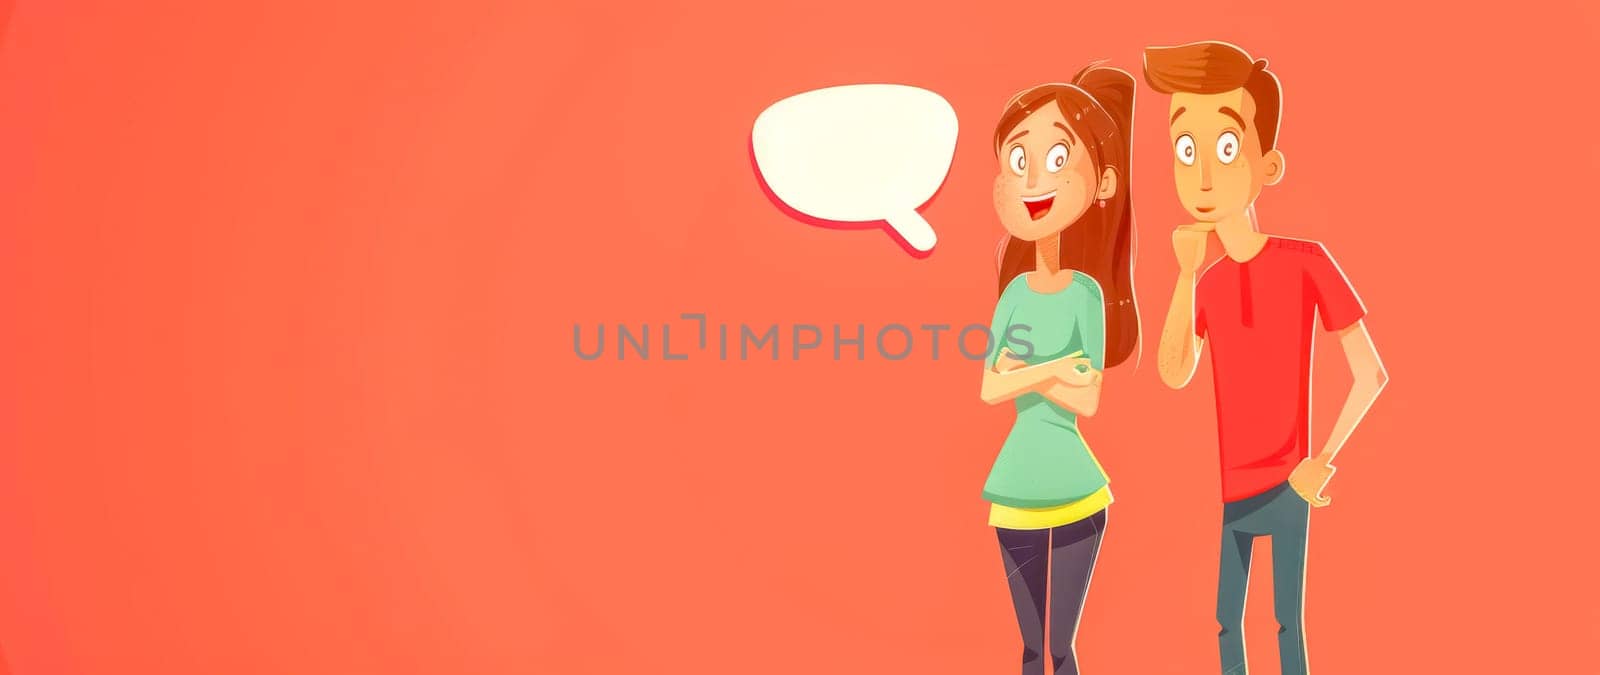 Illustrated young couple with an empty speech bubble on a vibrant coral backdrop